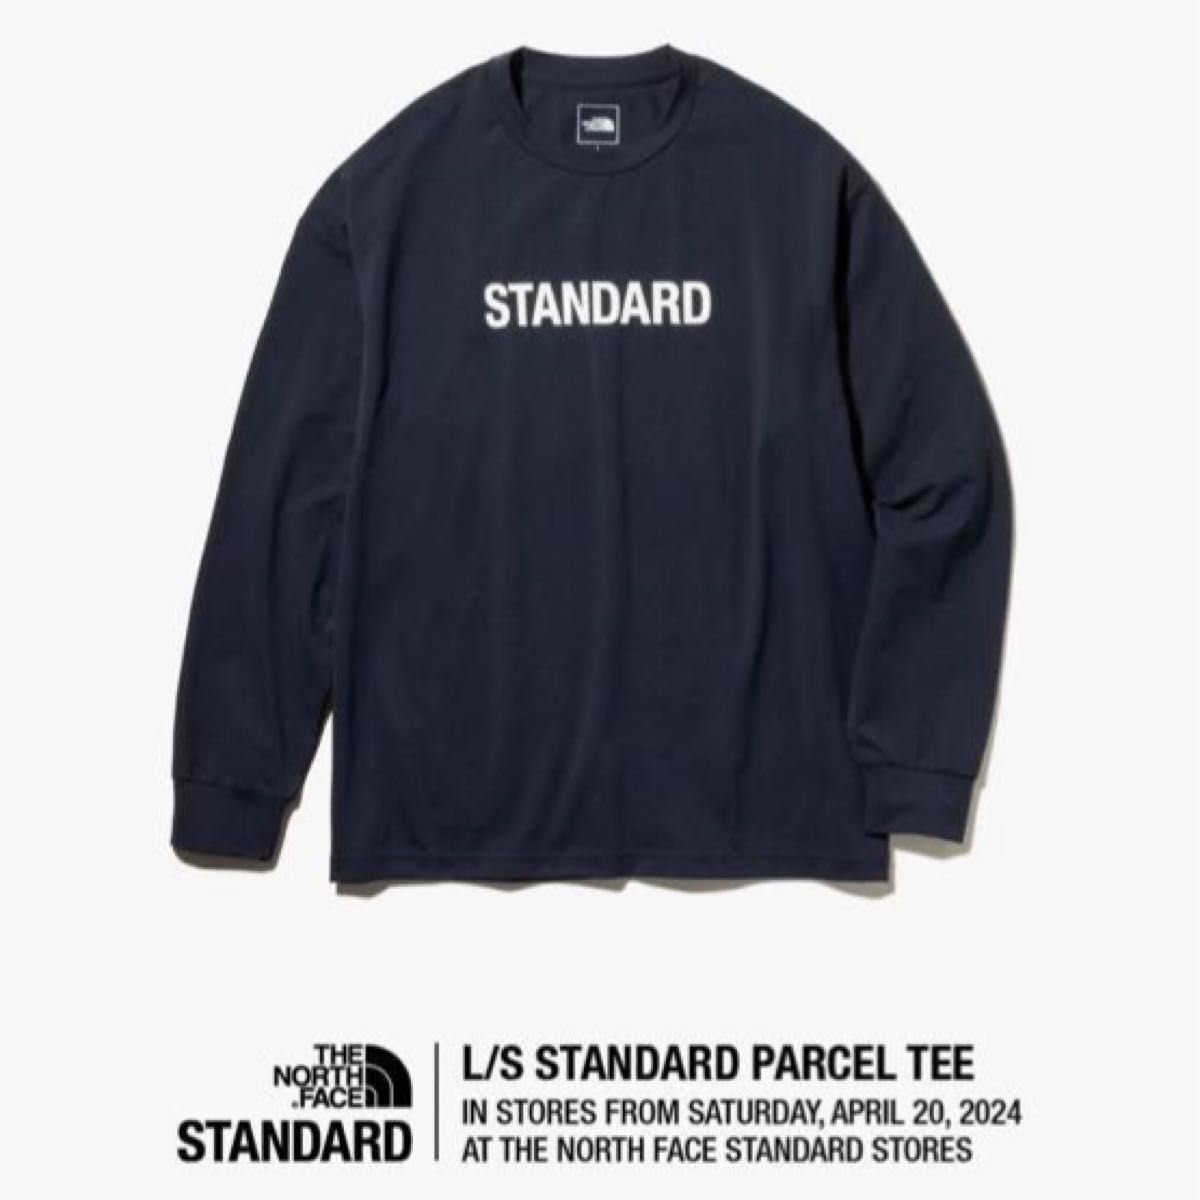 THE NORTH FACE L/S STANDARD PARCEL Tee